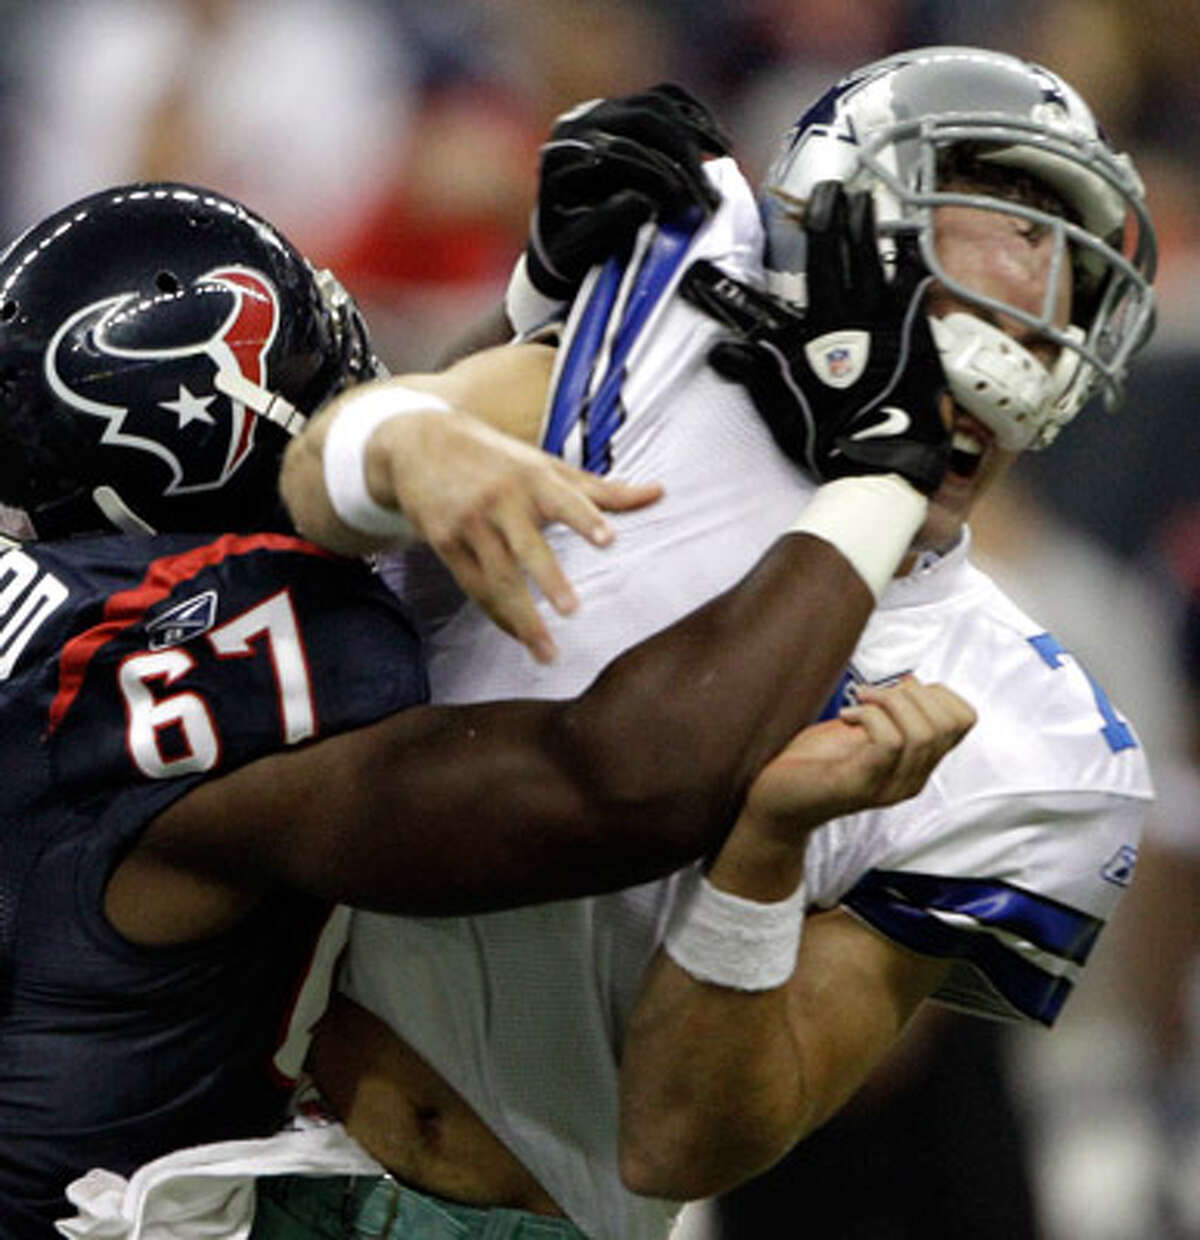 Cowboys third-string quarterback Stephen McGee gets rocked by Texans defensive tackle Malcolm Sheppard after throwing an incomplete pass Saturday. Houston won 23-7.